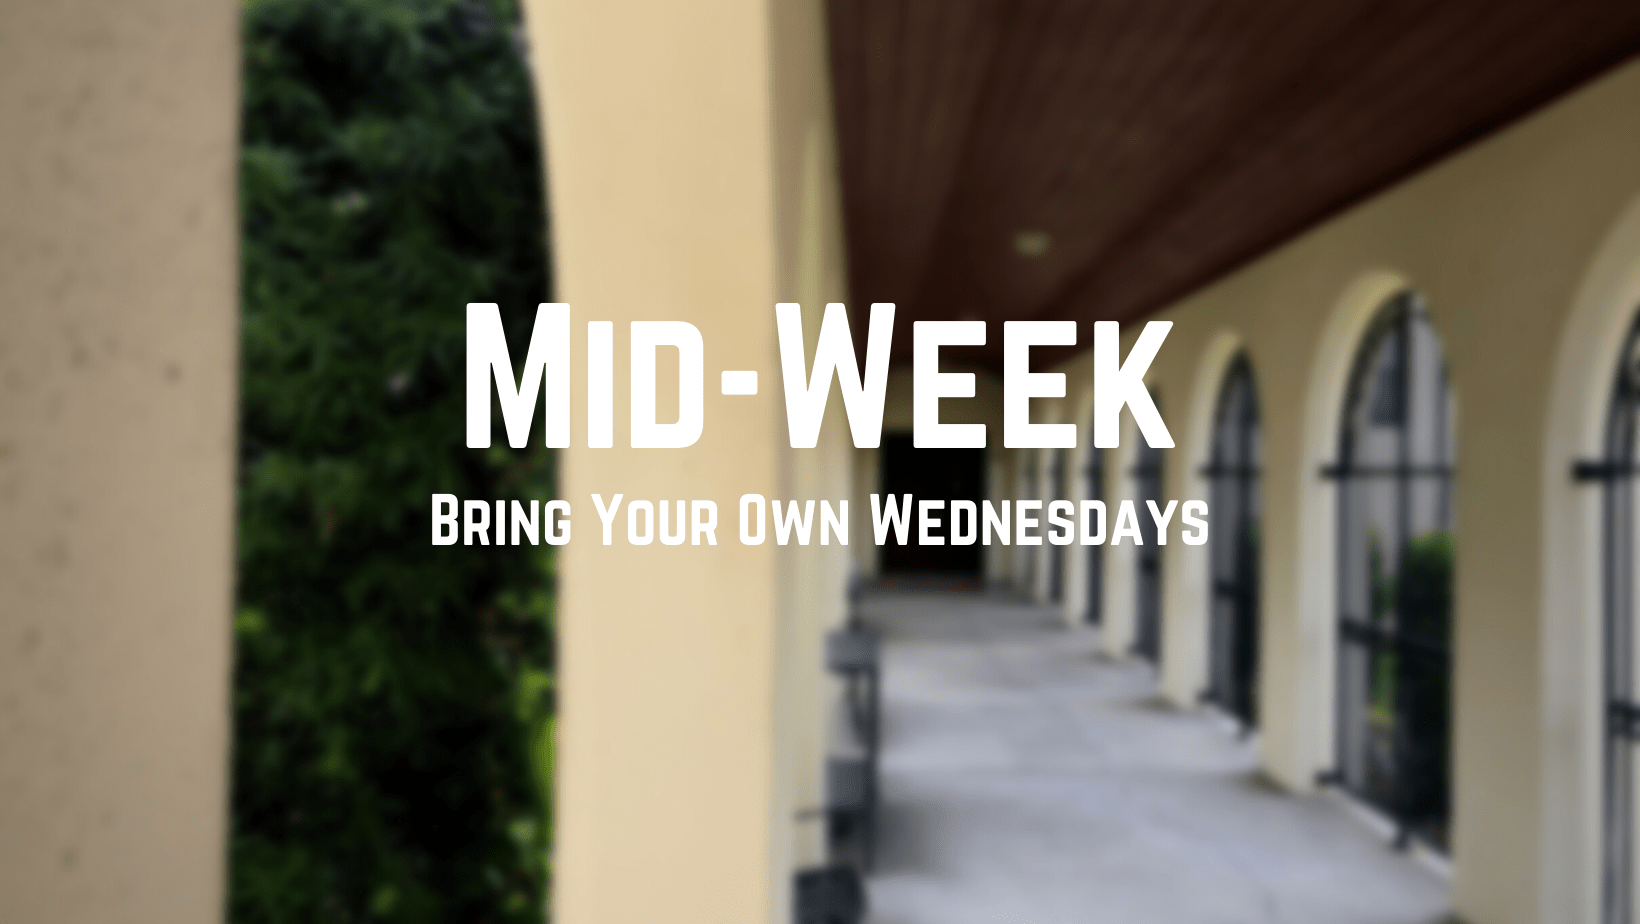 Bring Your Own Wednesdays